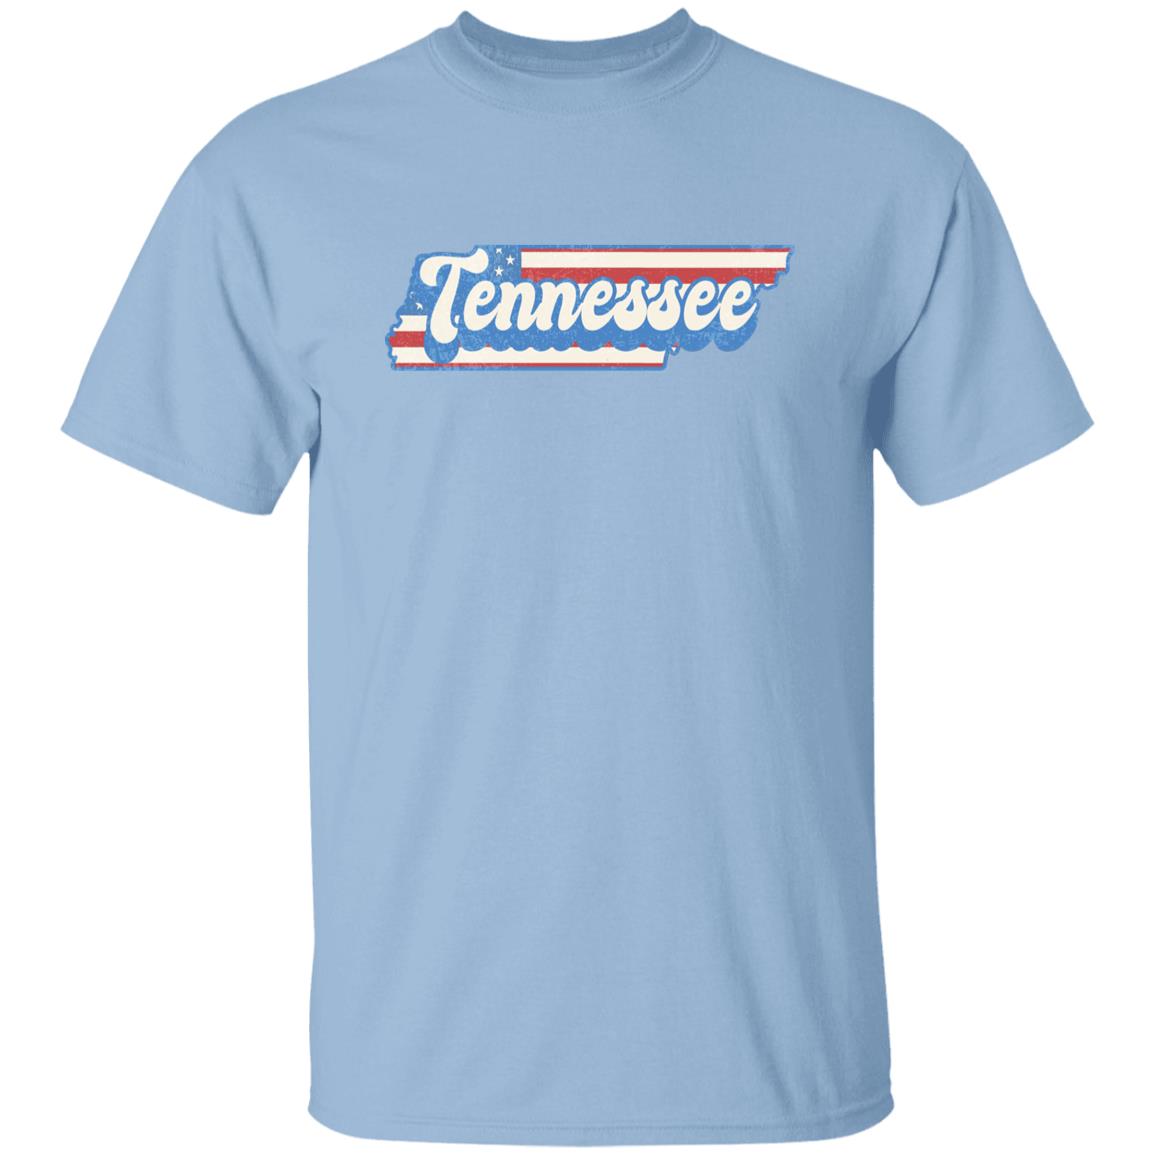 Tennessee US flag Unisex T-Shirt American patriotic TN state tee White Ash Blue-Light Blue-Family-Gift-Planet